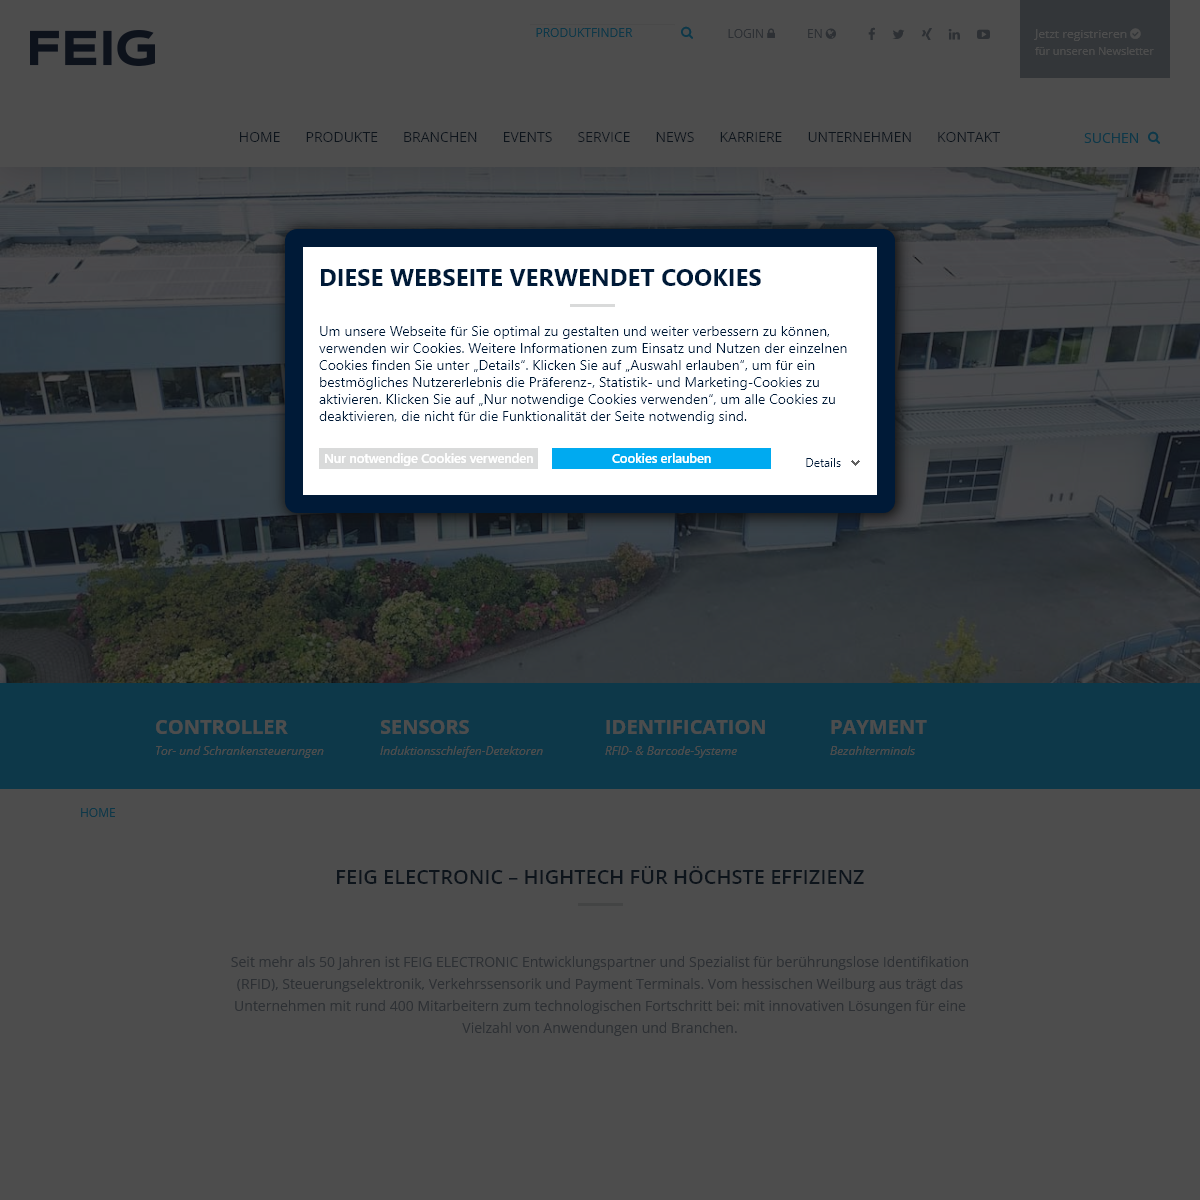 A complete backup of feig.de